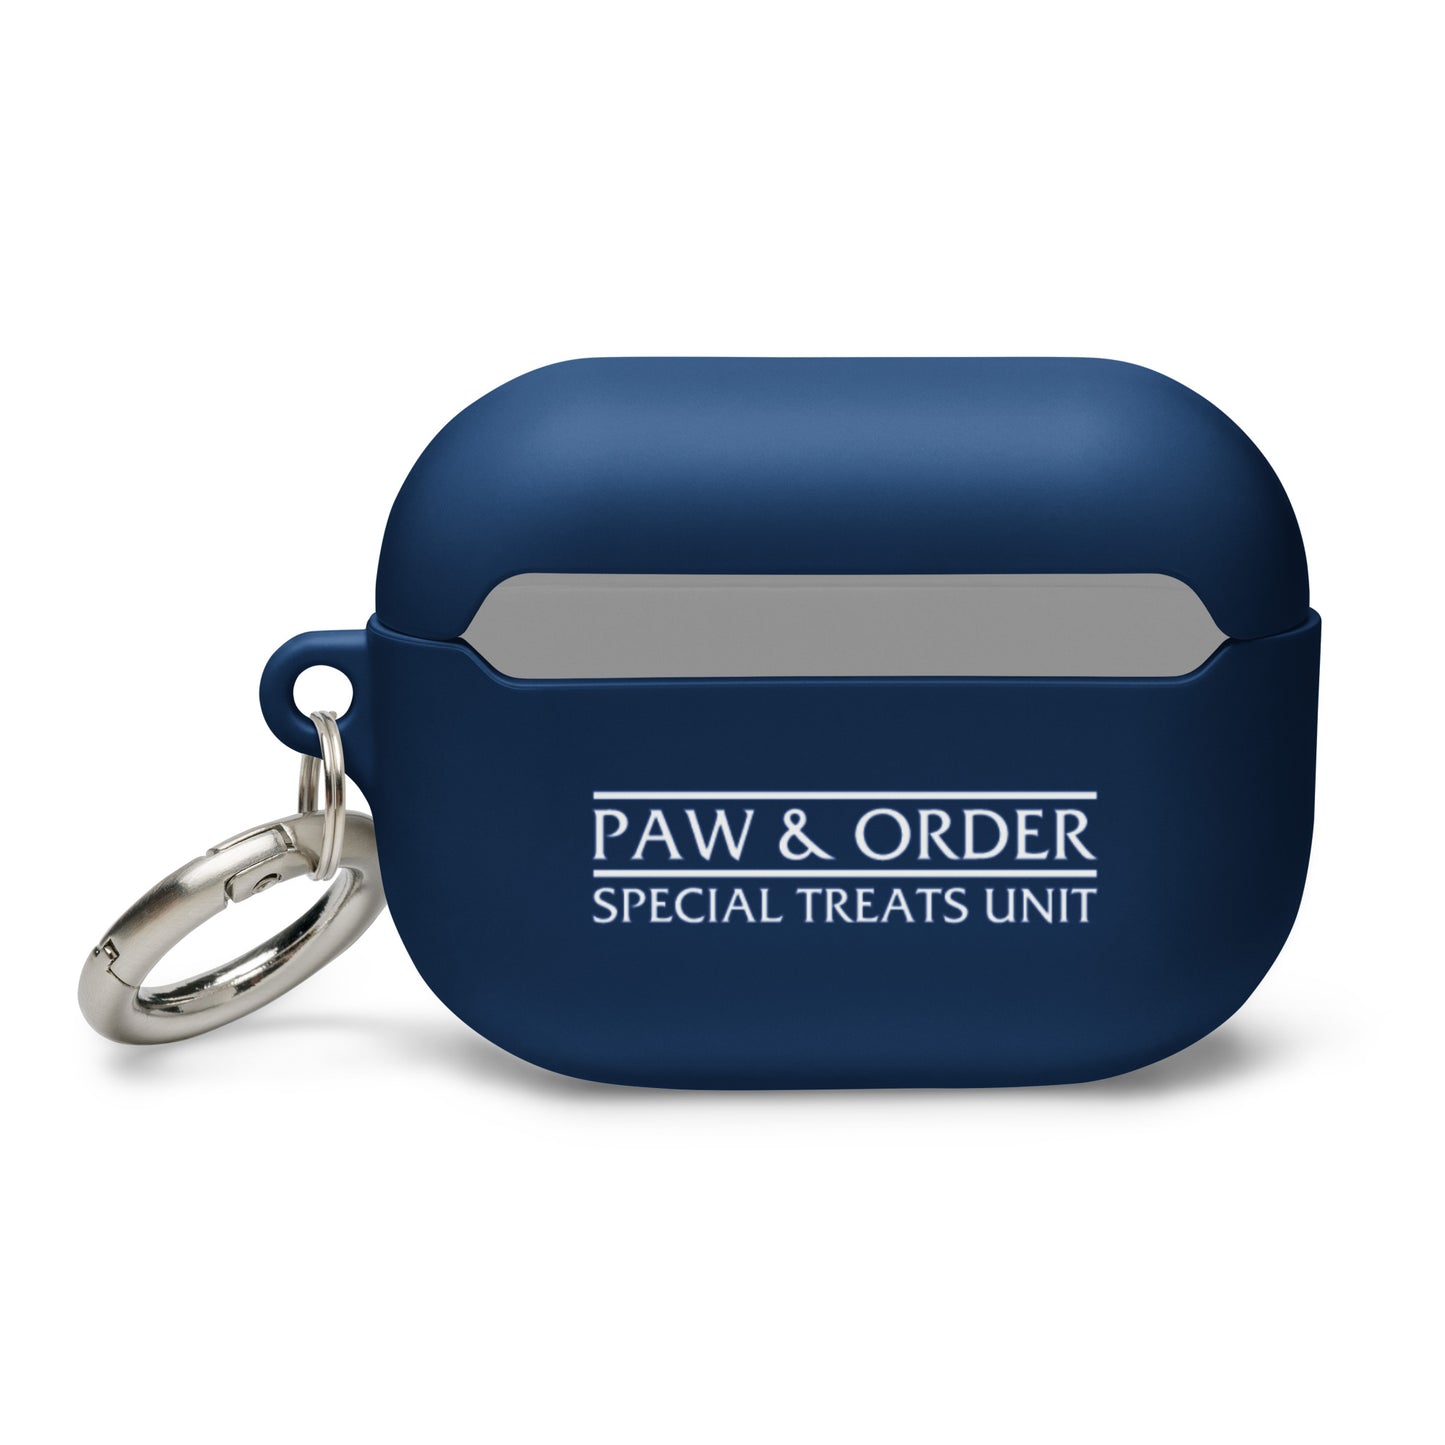 Special Treats Unit AirPods Case